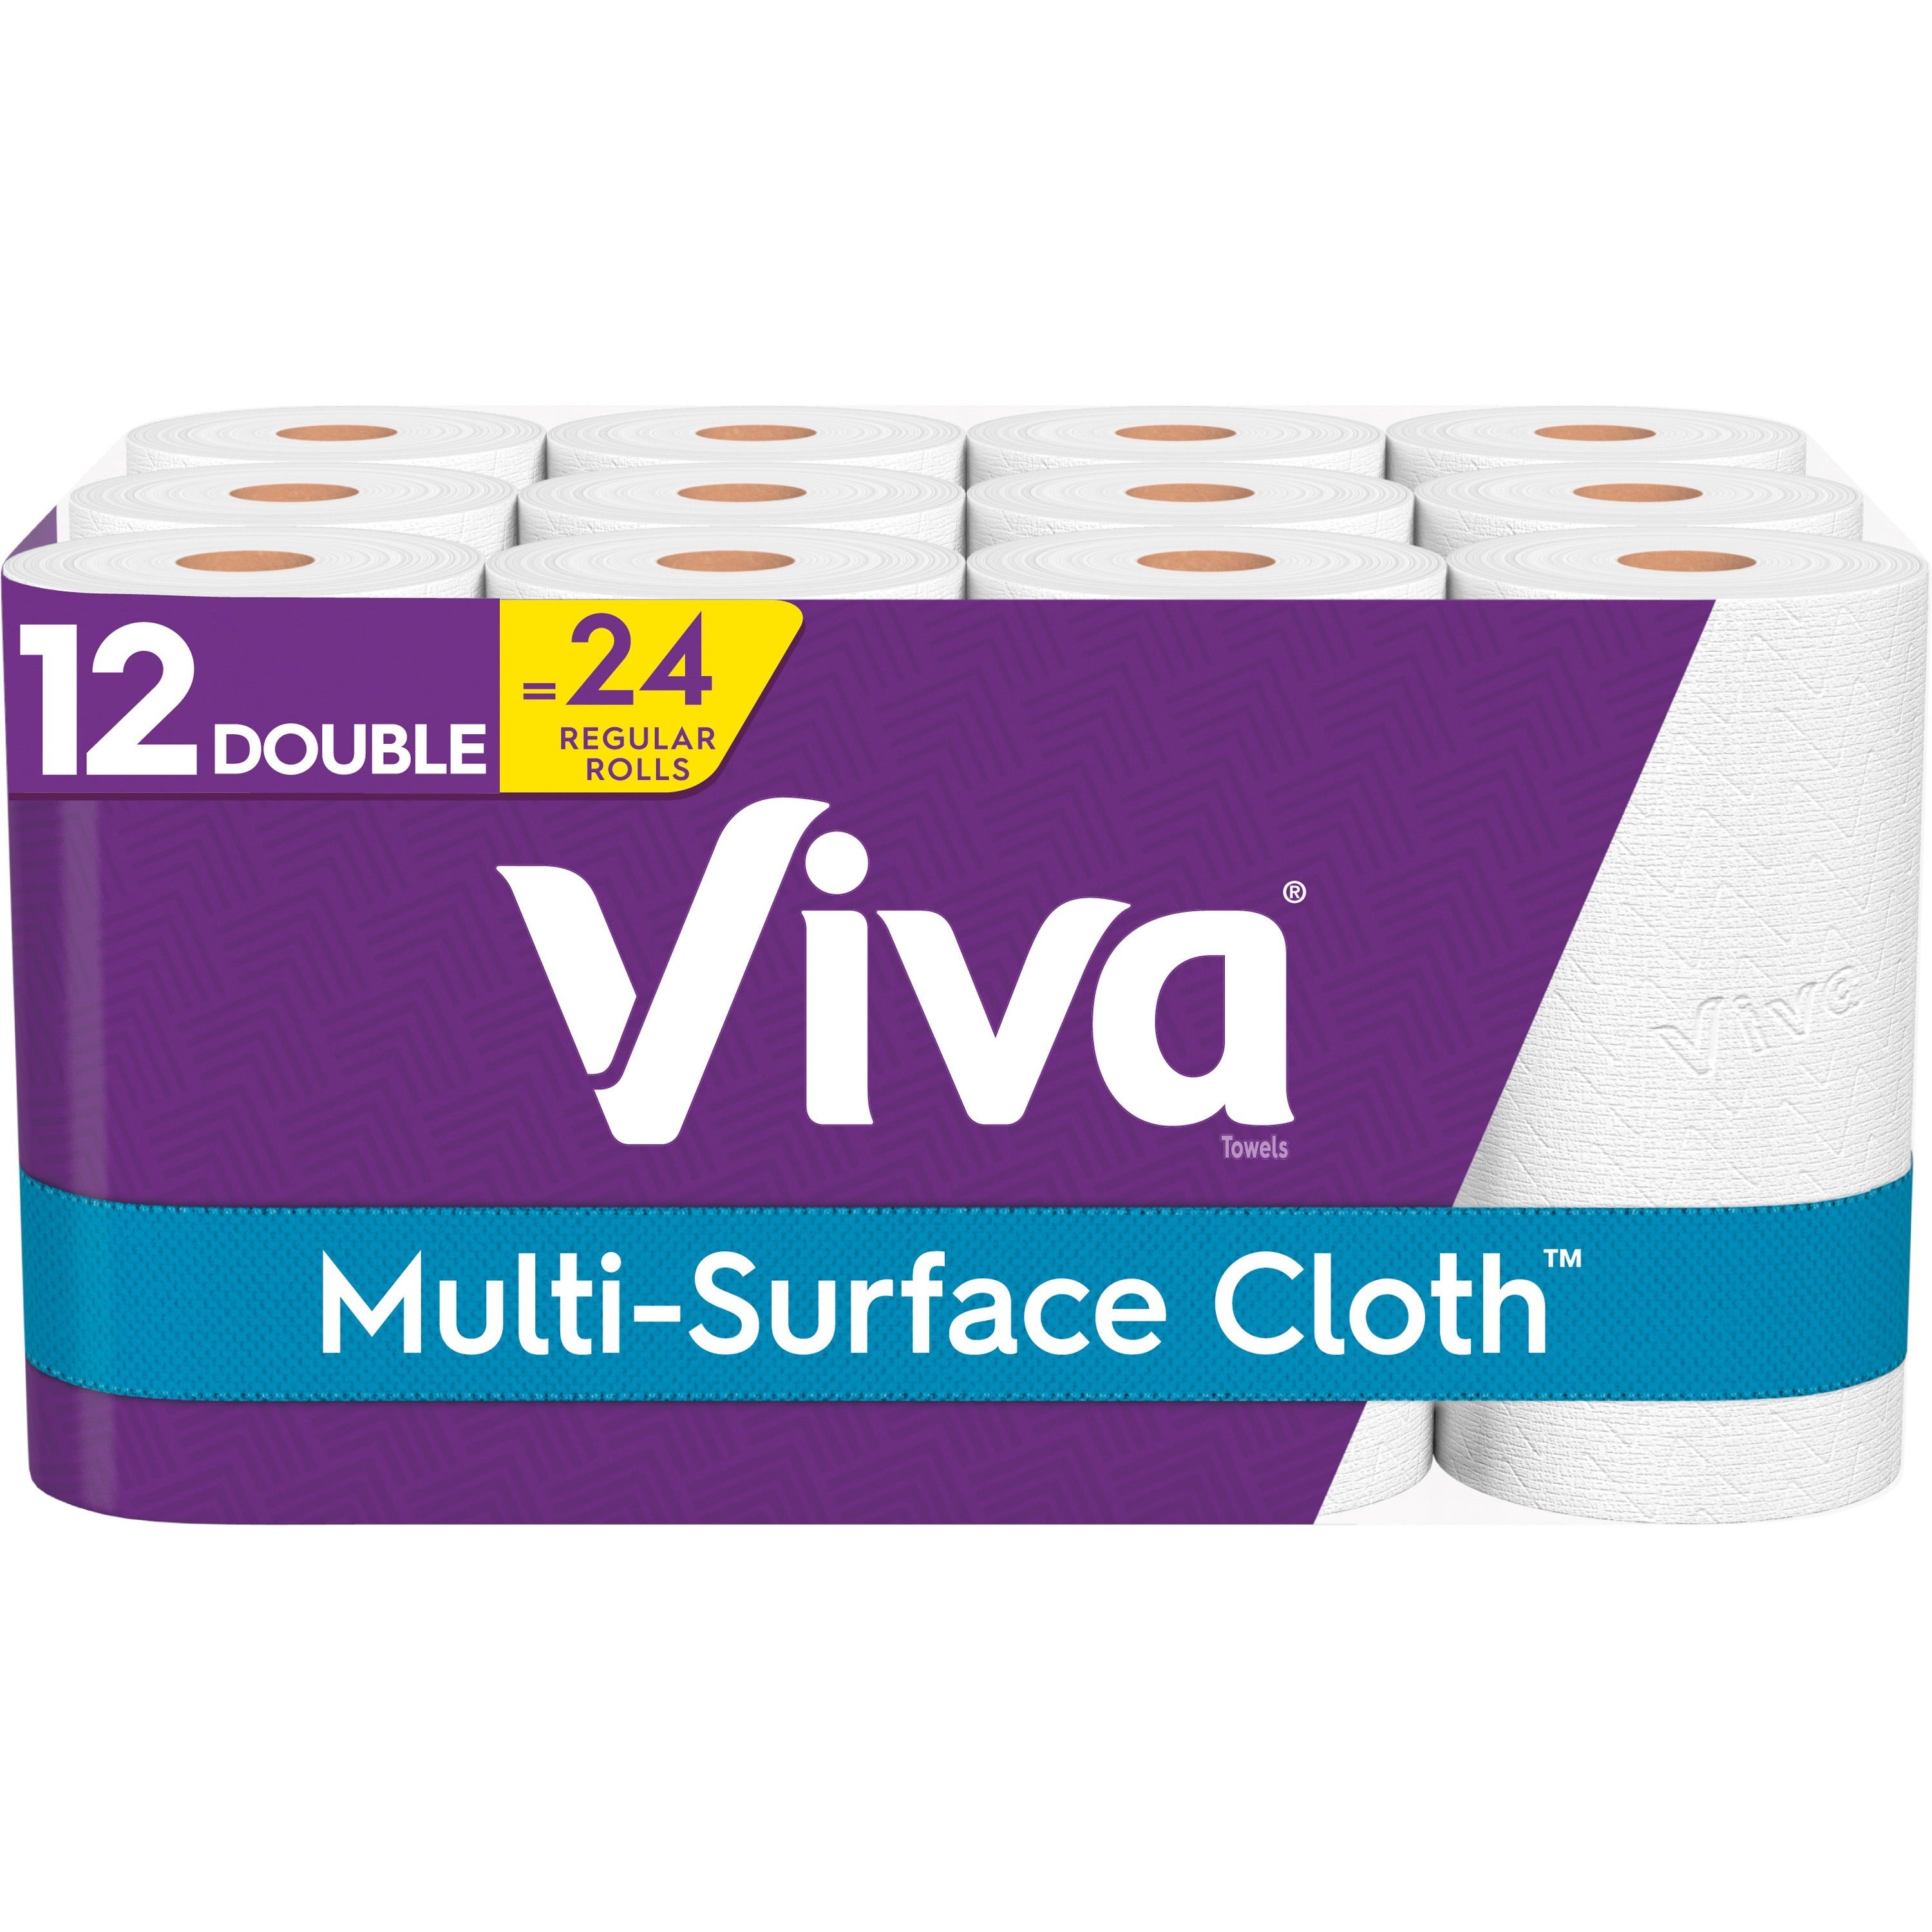 viva-multi-surface-cloth-towels-2-ply-white-perforated-absorbent-cleaning-durable-strong-versatile-for-multi-surface-12-pack_kcc54518 - 2